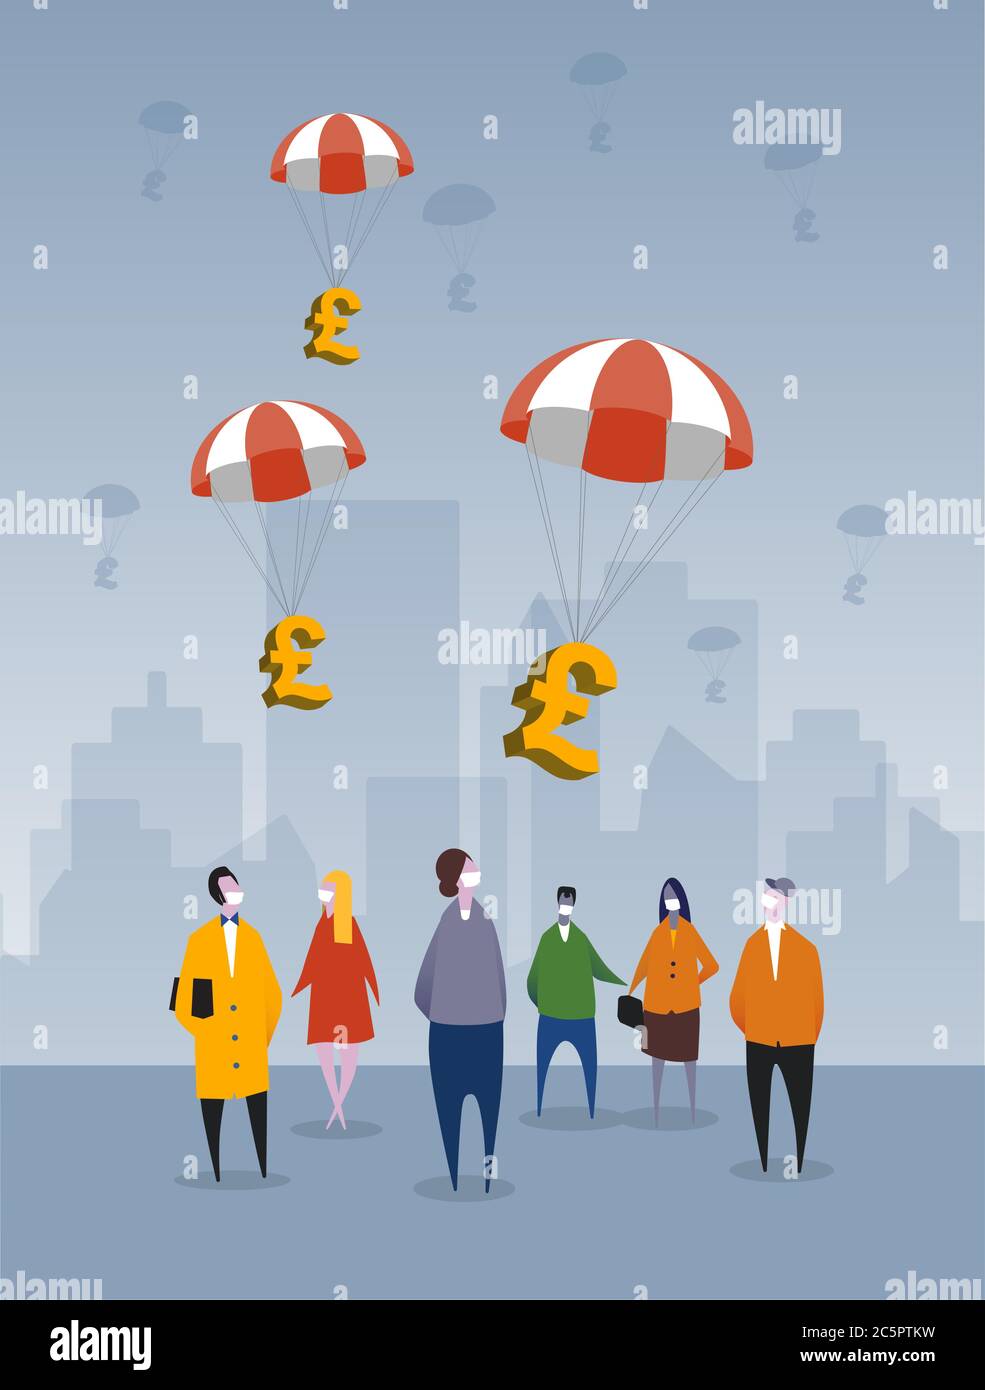 Portrait: The British government plans financial relief  for impending recession from the COVID-19 crisis. Citizens are looking up with city backdrop. Stock Vector